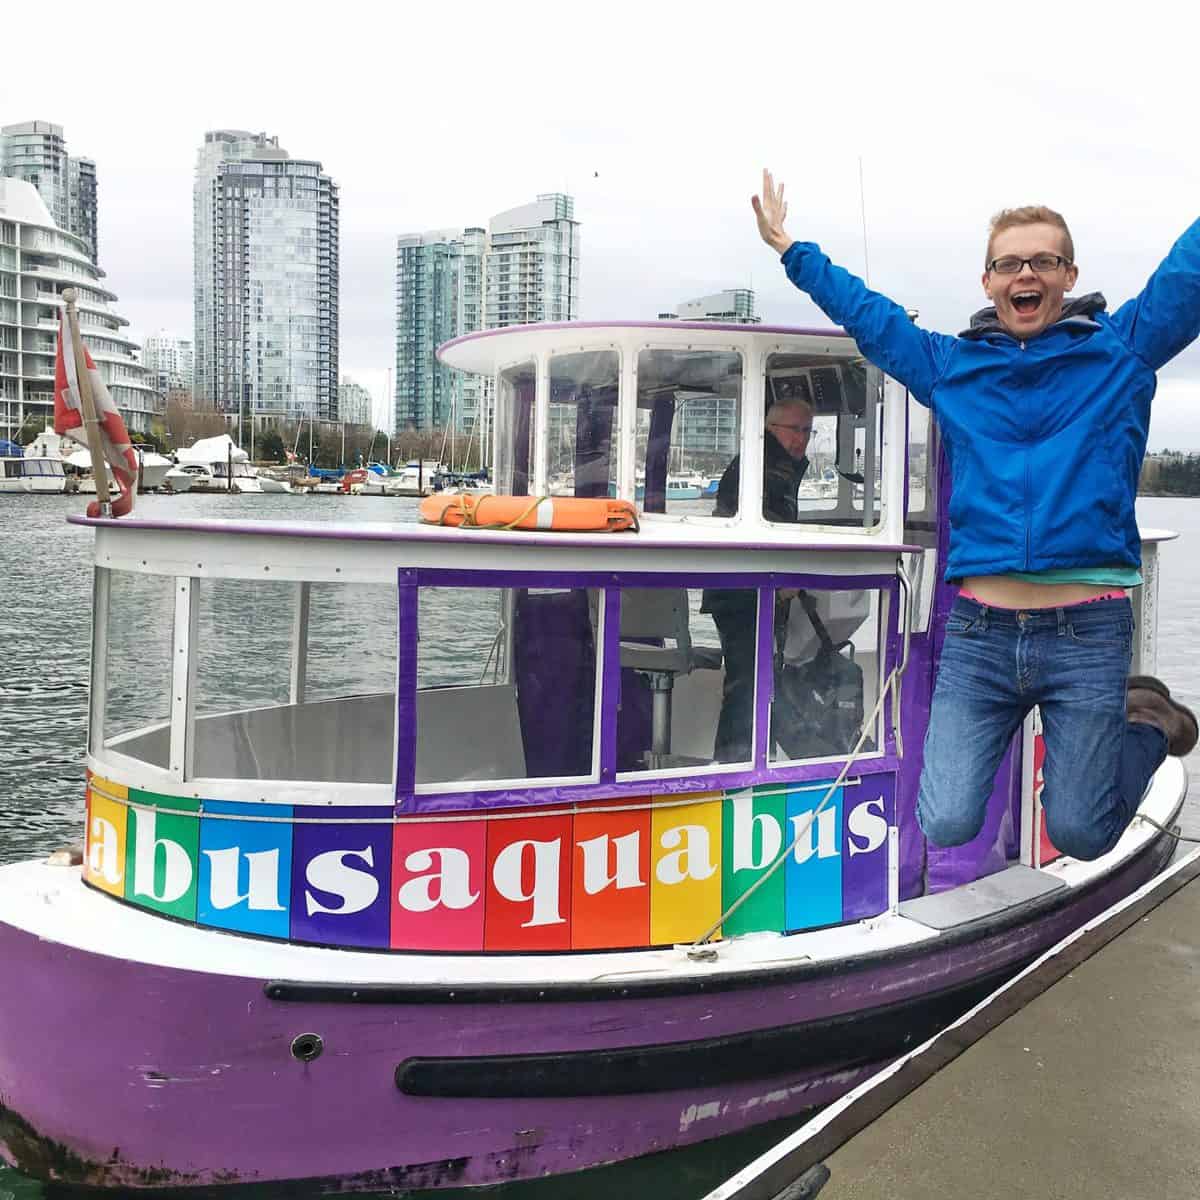 Gay Vancouver: Travel Guide to Vancouver Gay Bars, Gay Clubs & Top Attractions